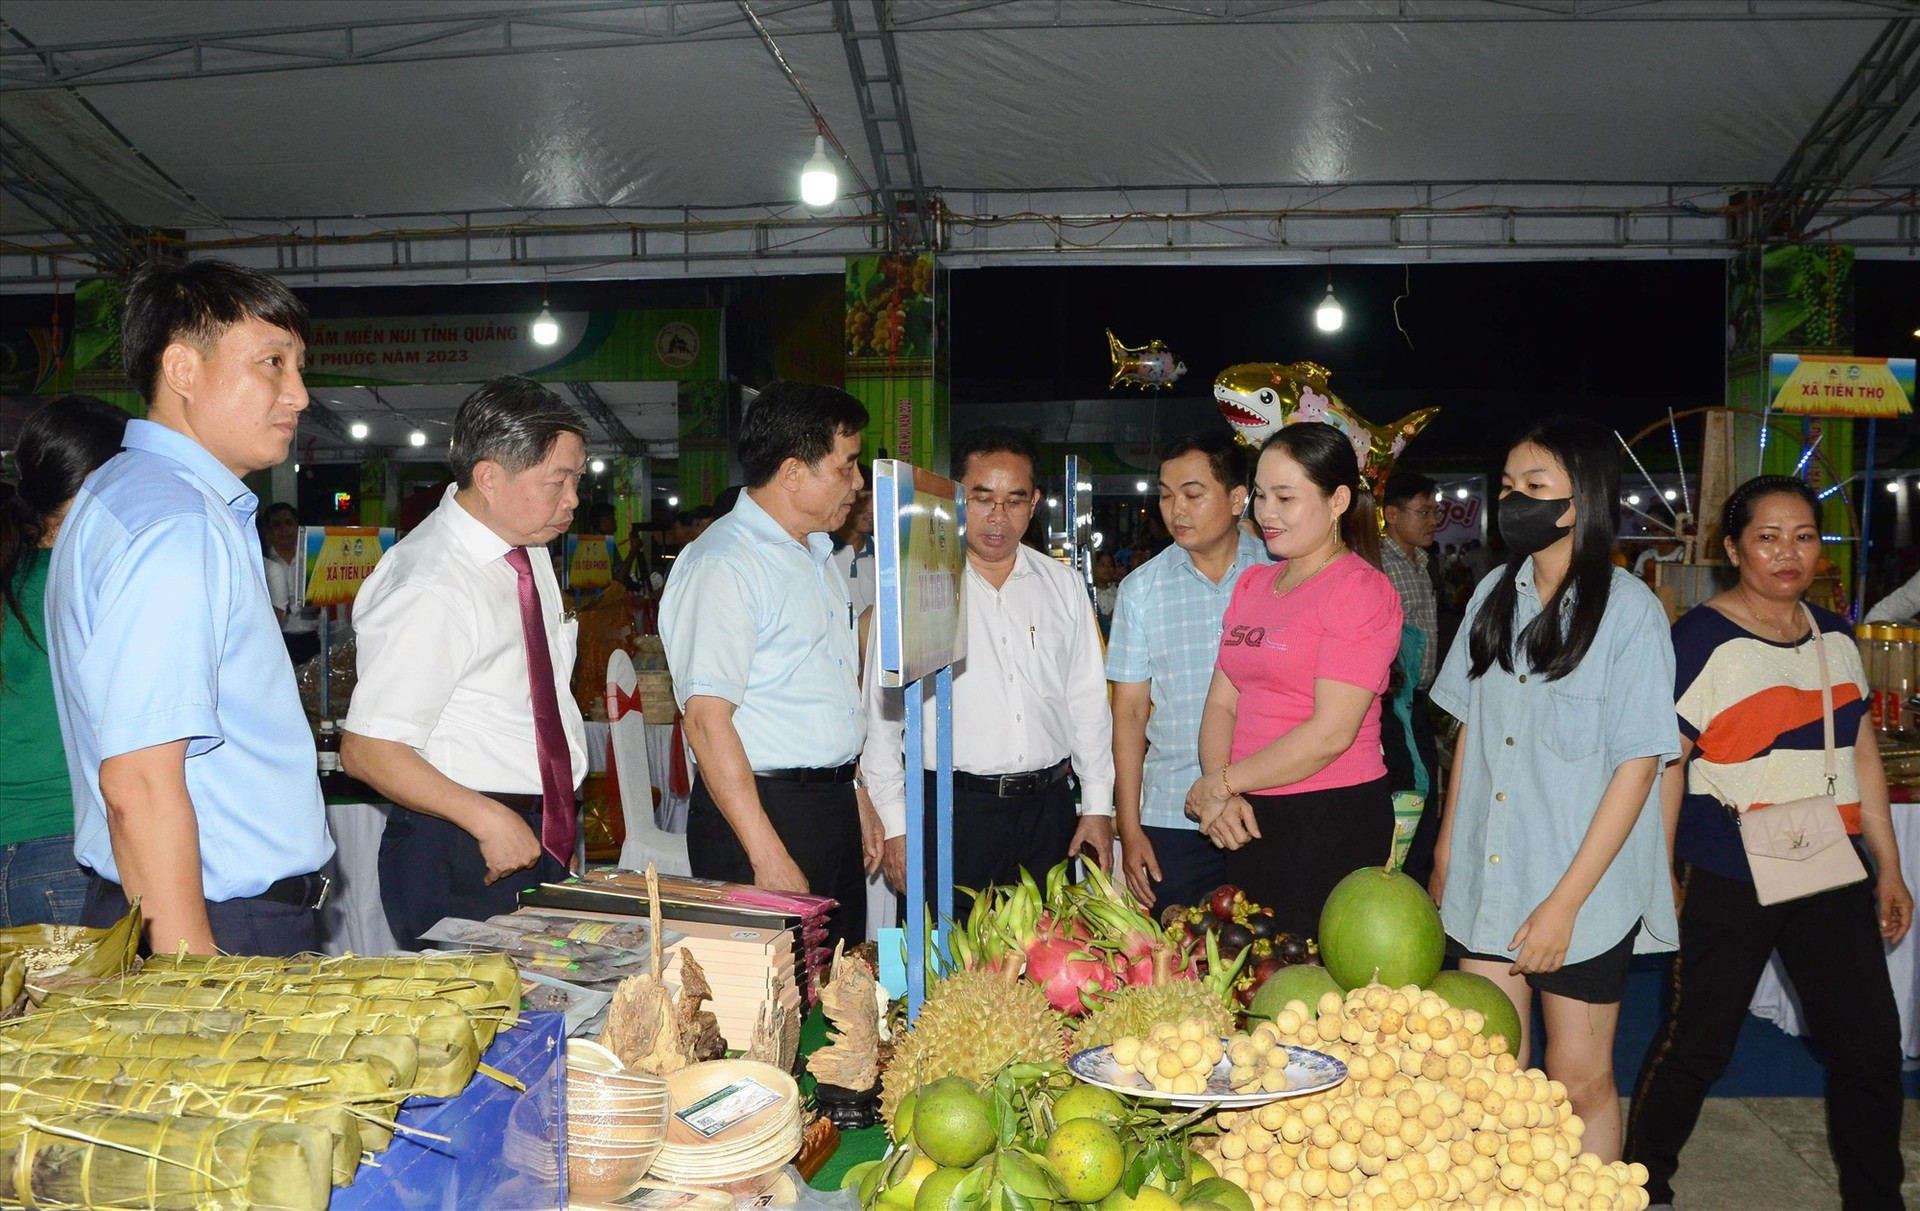 Various agricultural products such as durians, mangosteens, yogurt with black sticky rice are displayed and sold at the fair.